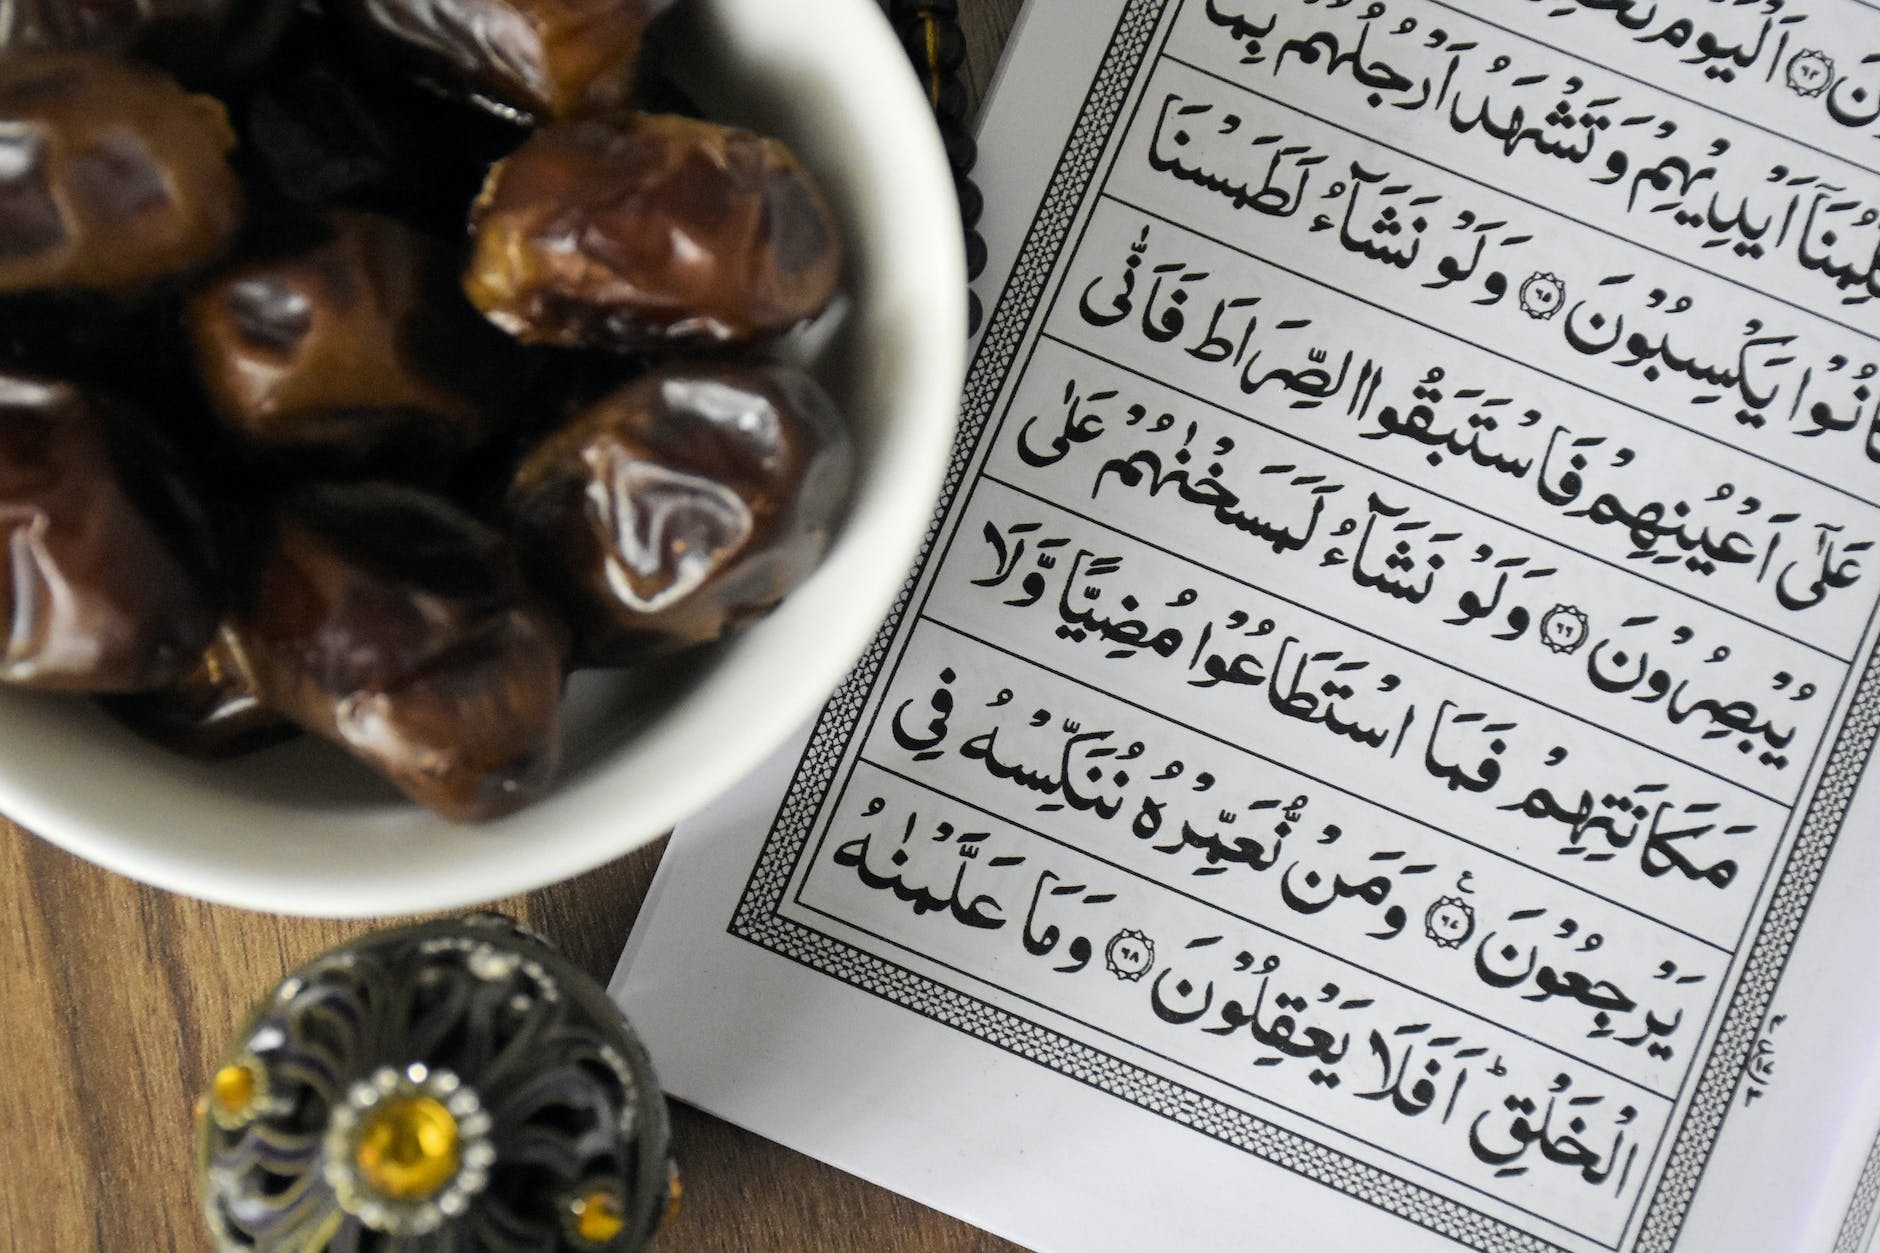 Eat healthy foods in the month of Ramadan.